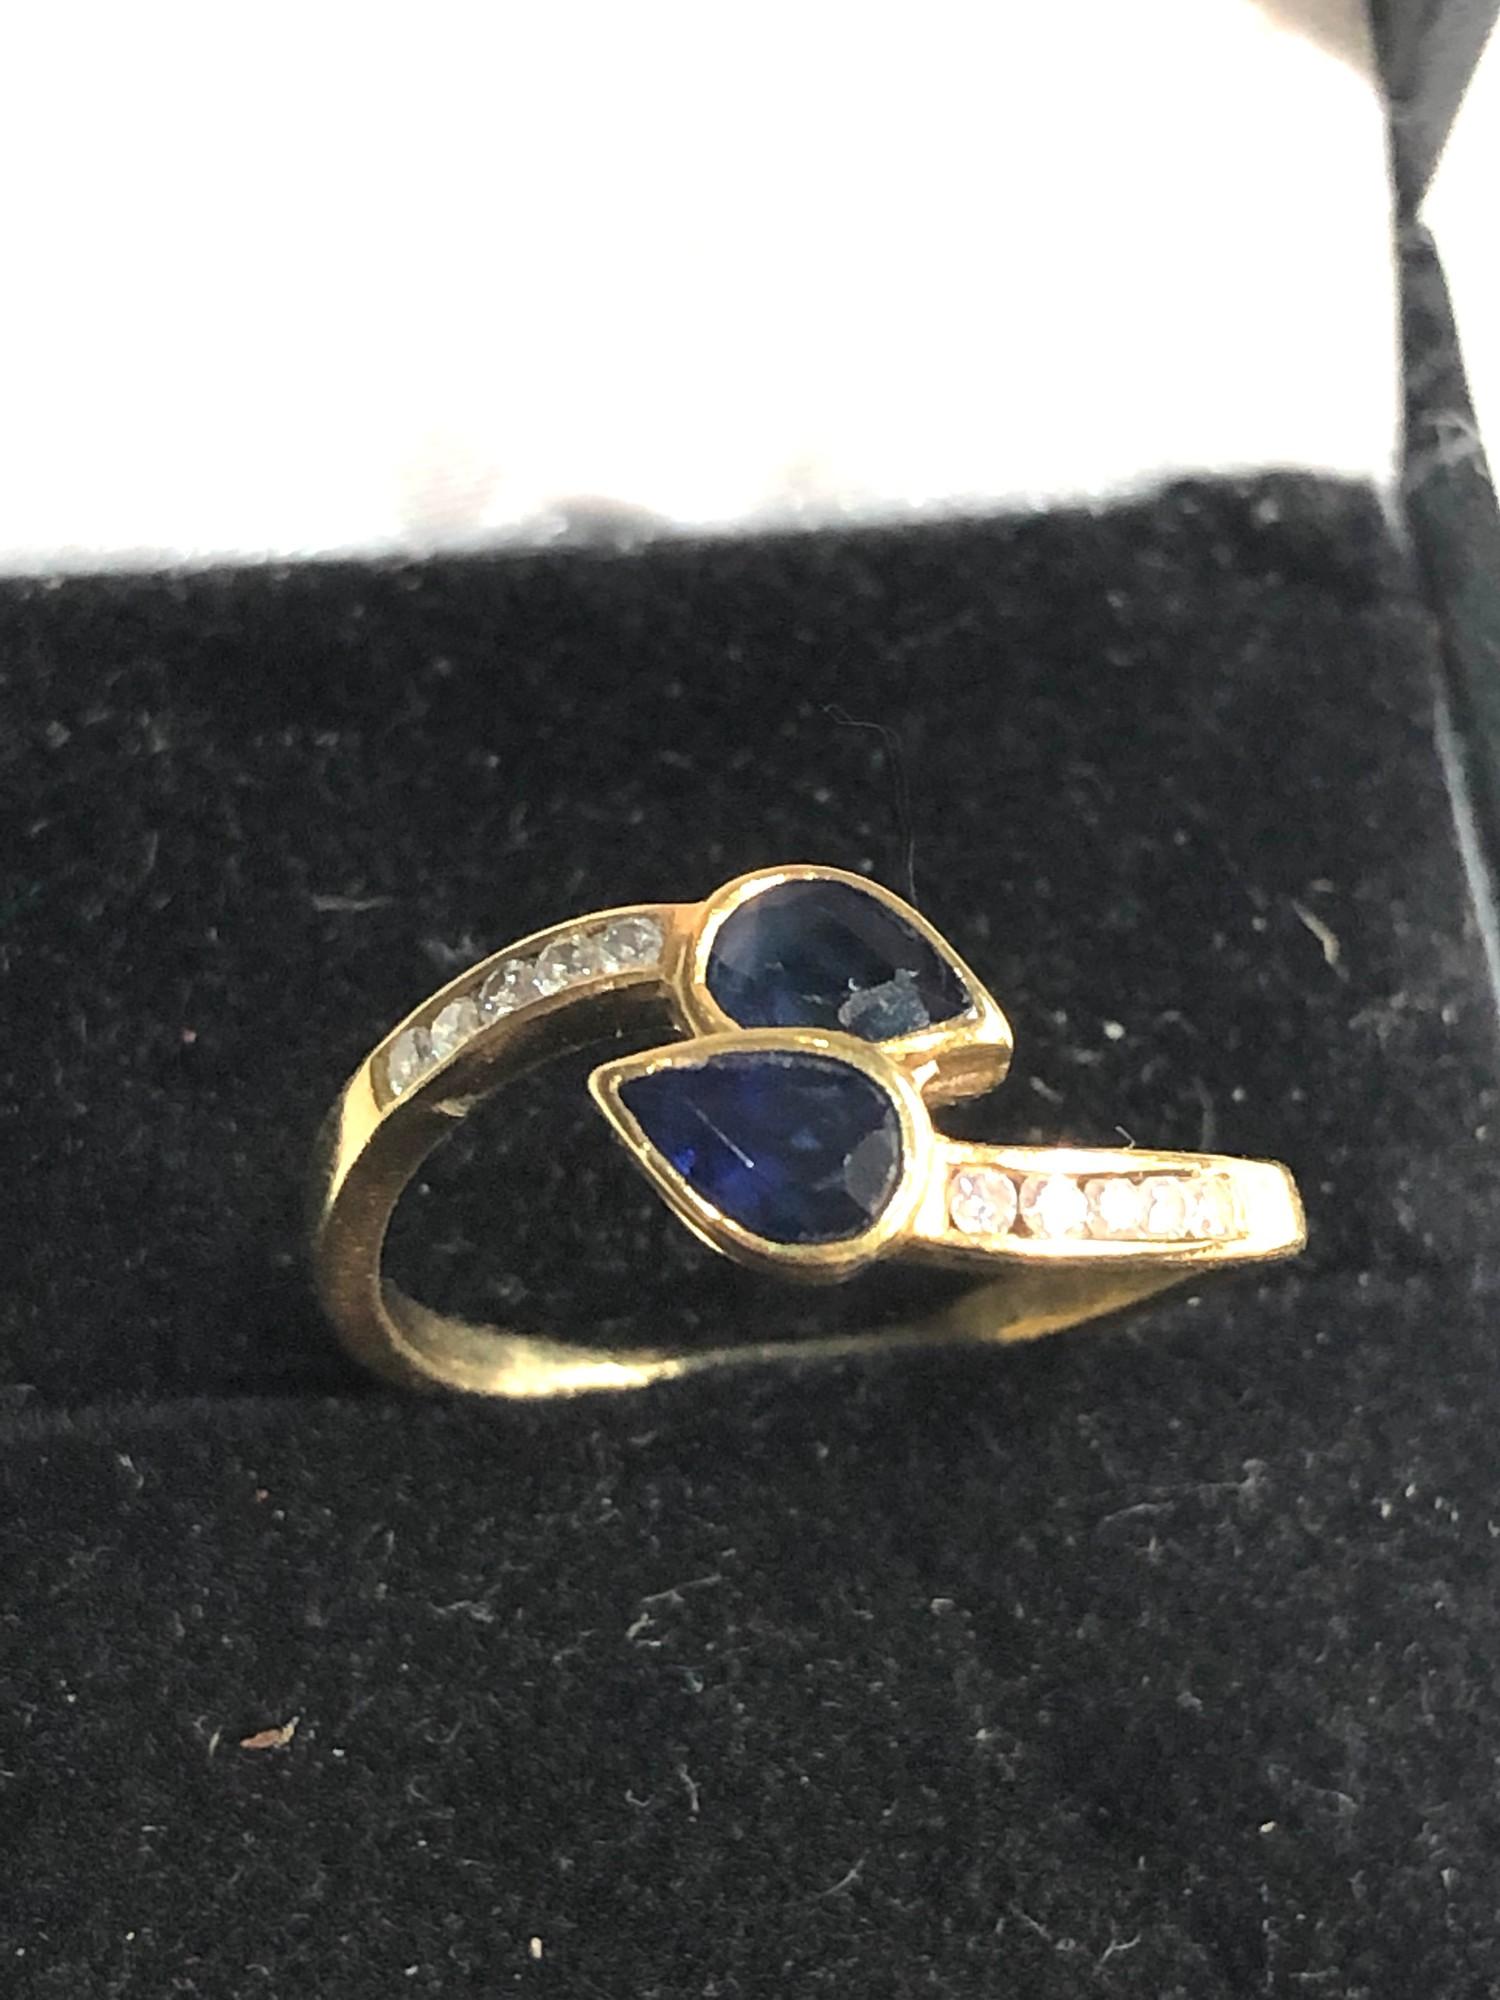 18ct gold sapphire & diamond wrap ring weight 3g - Image 2 of 4